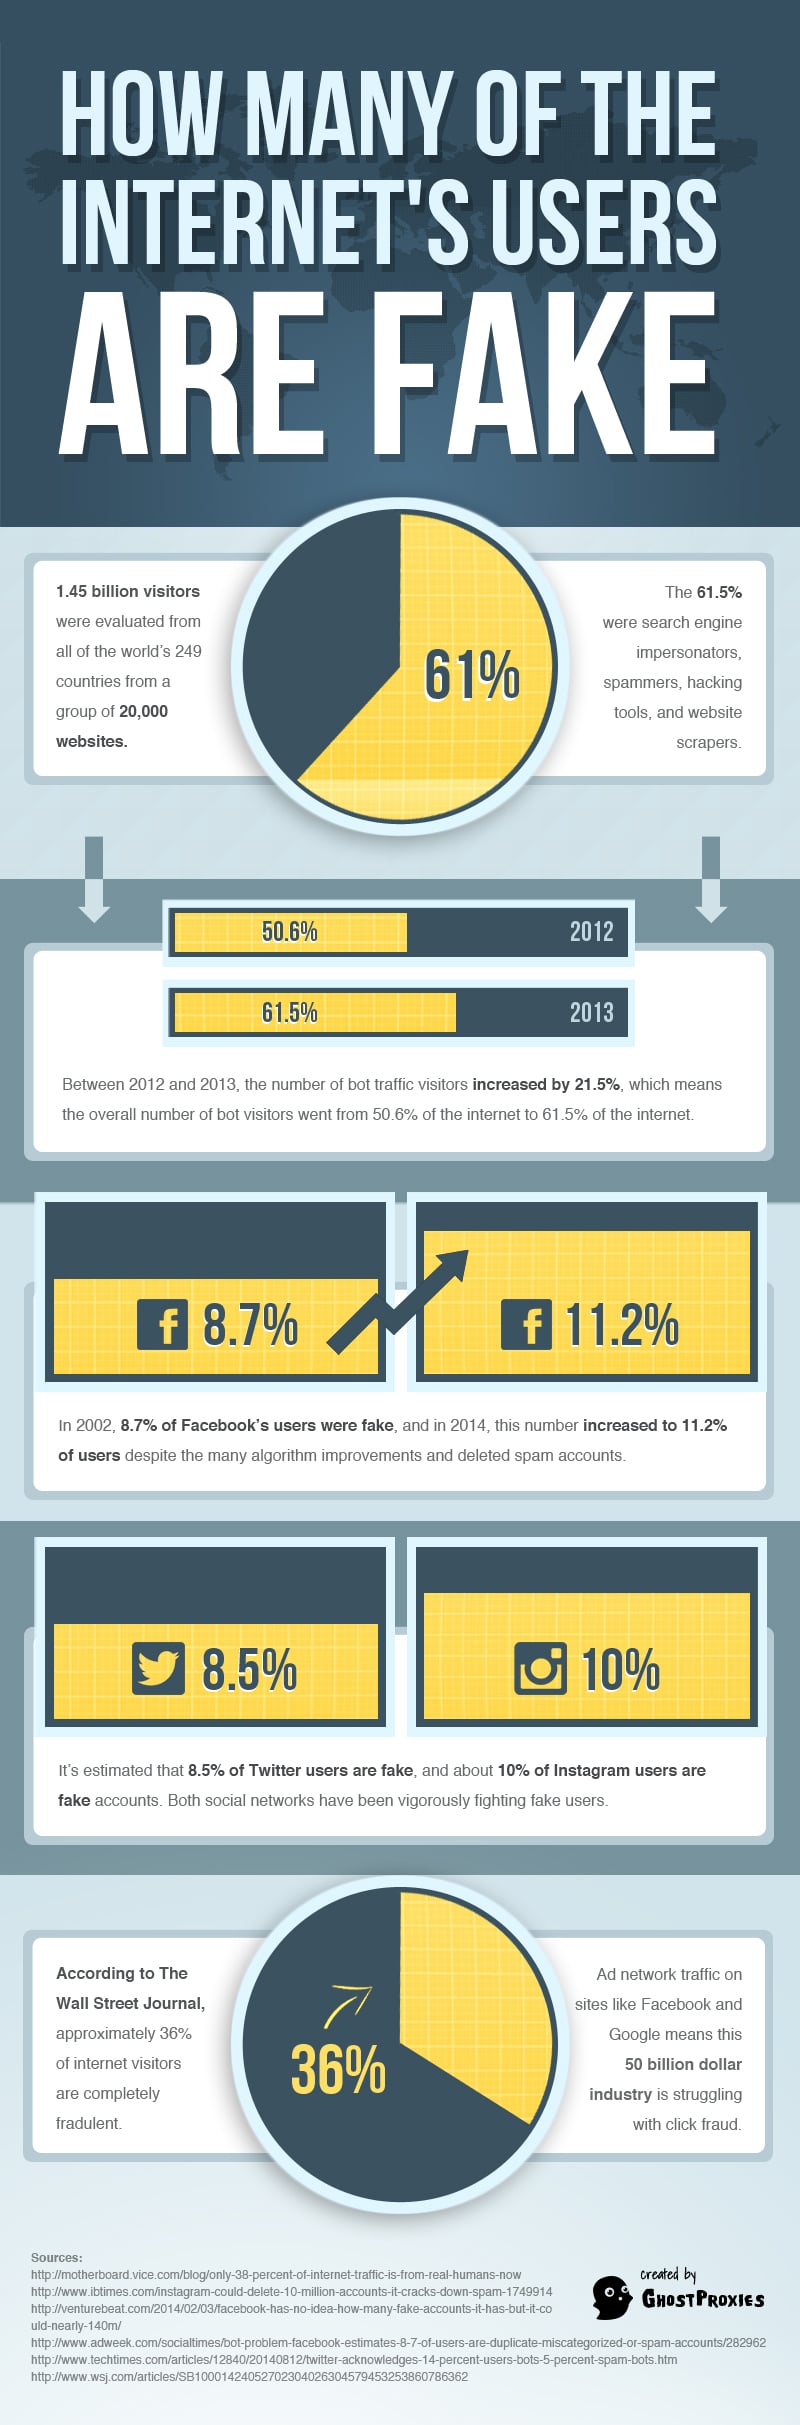 How Many Internet Users Are Fake? [Infographic]